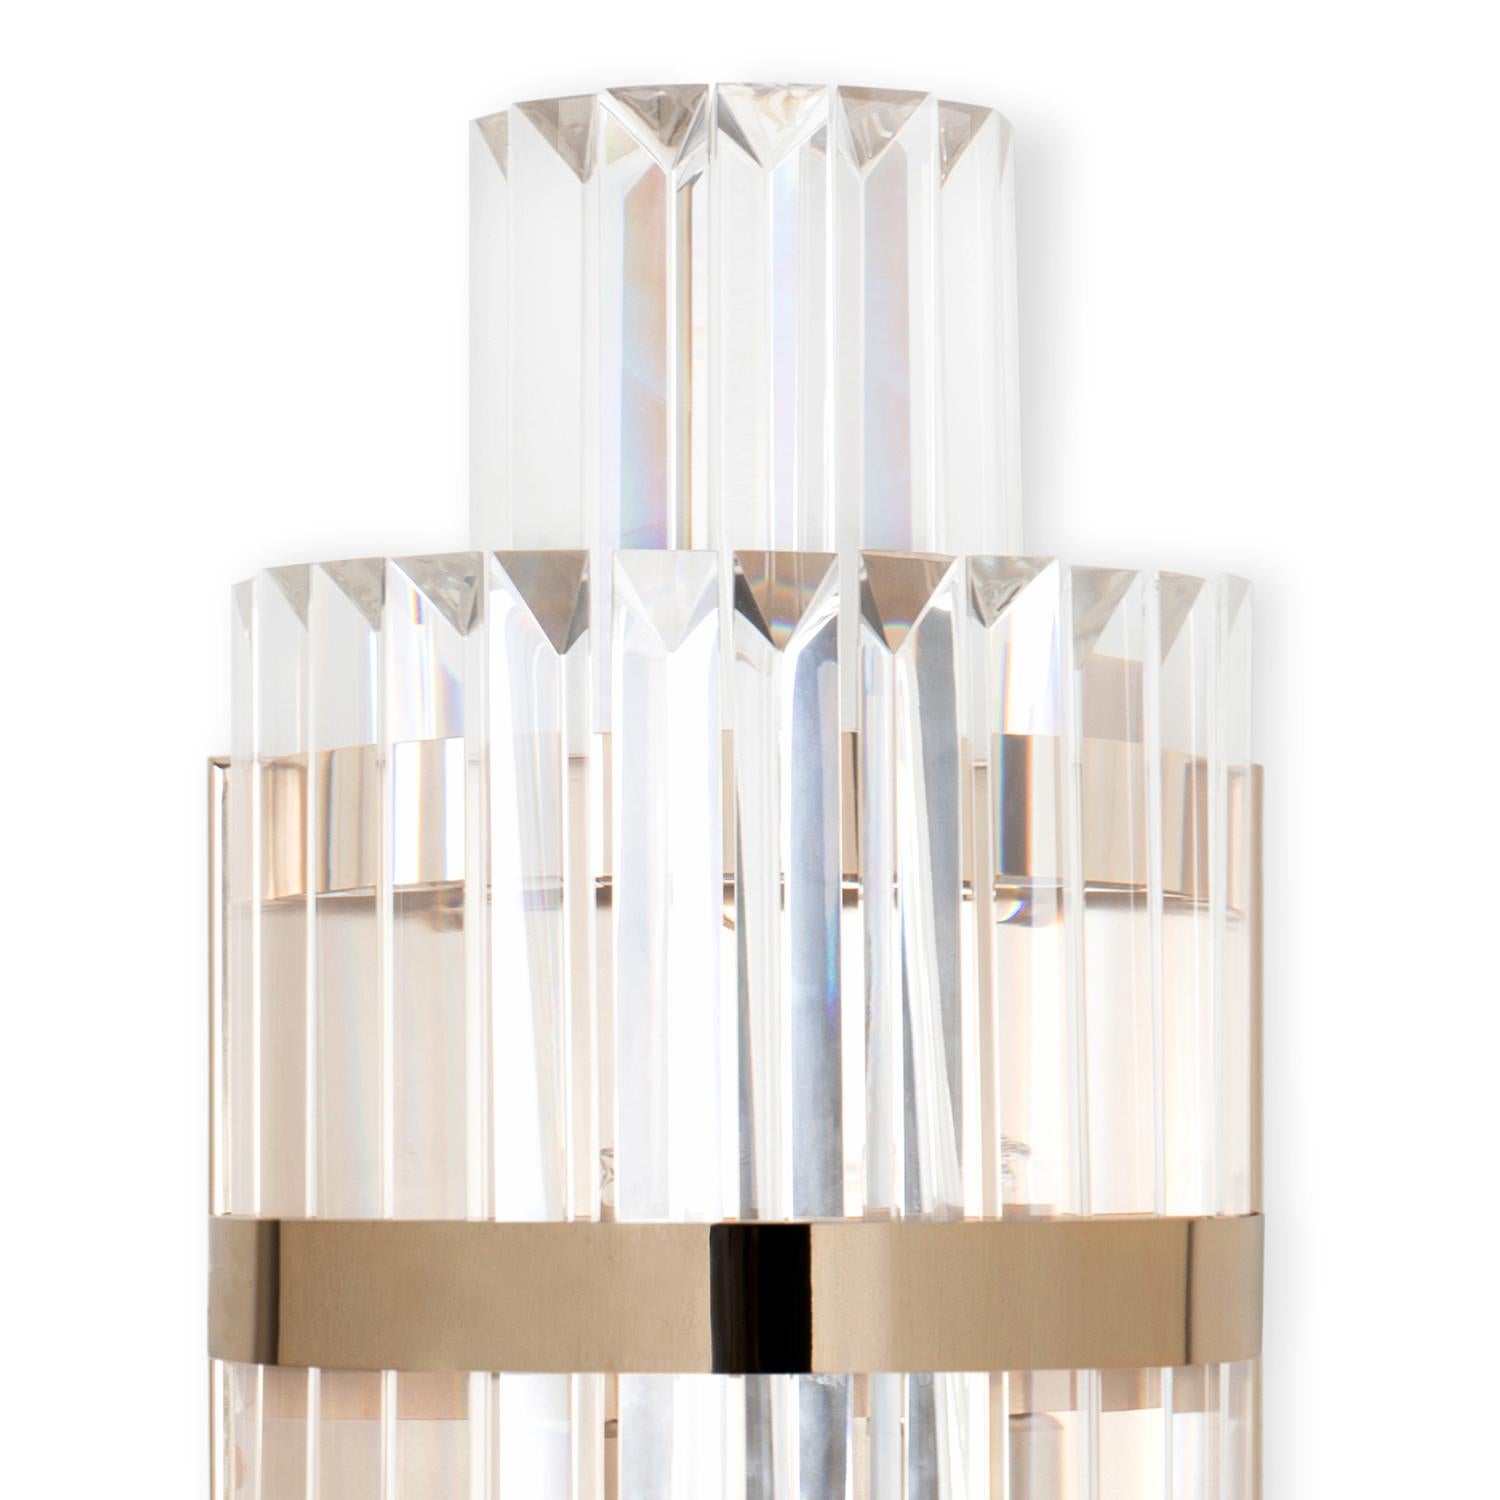 Wall lamp santana with polished brass structure 
and with shade in carved crystal glass. With 4 halogen 
bulbs, lamp holder type g9 (40W max), Voltage: 220-240V. 
Bulbs not included.